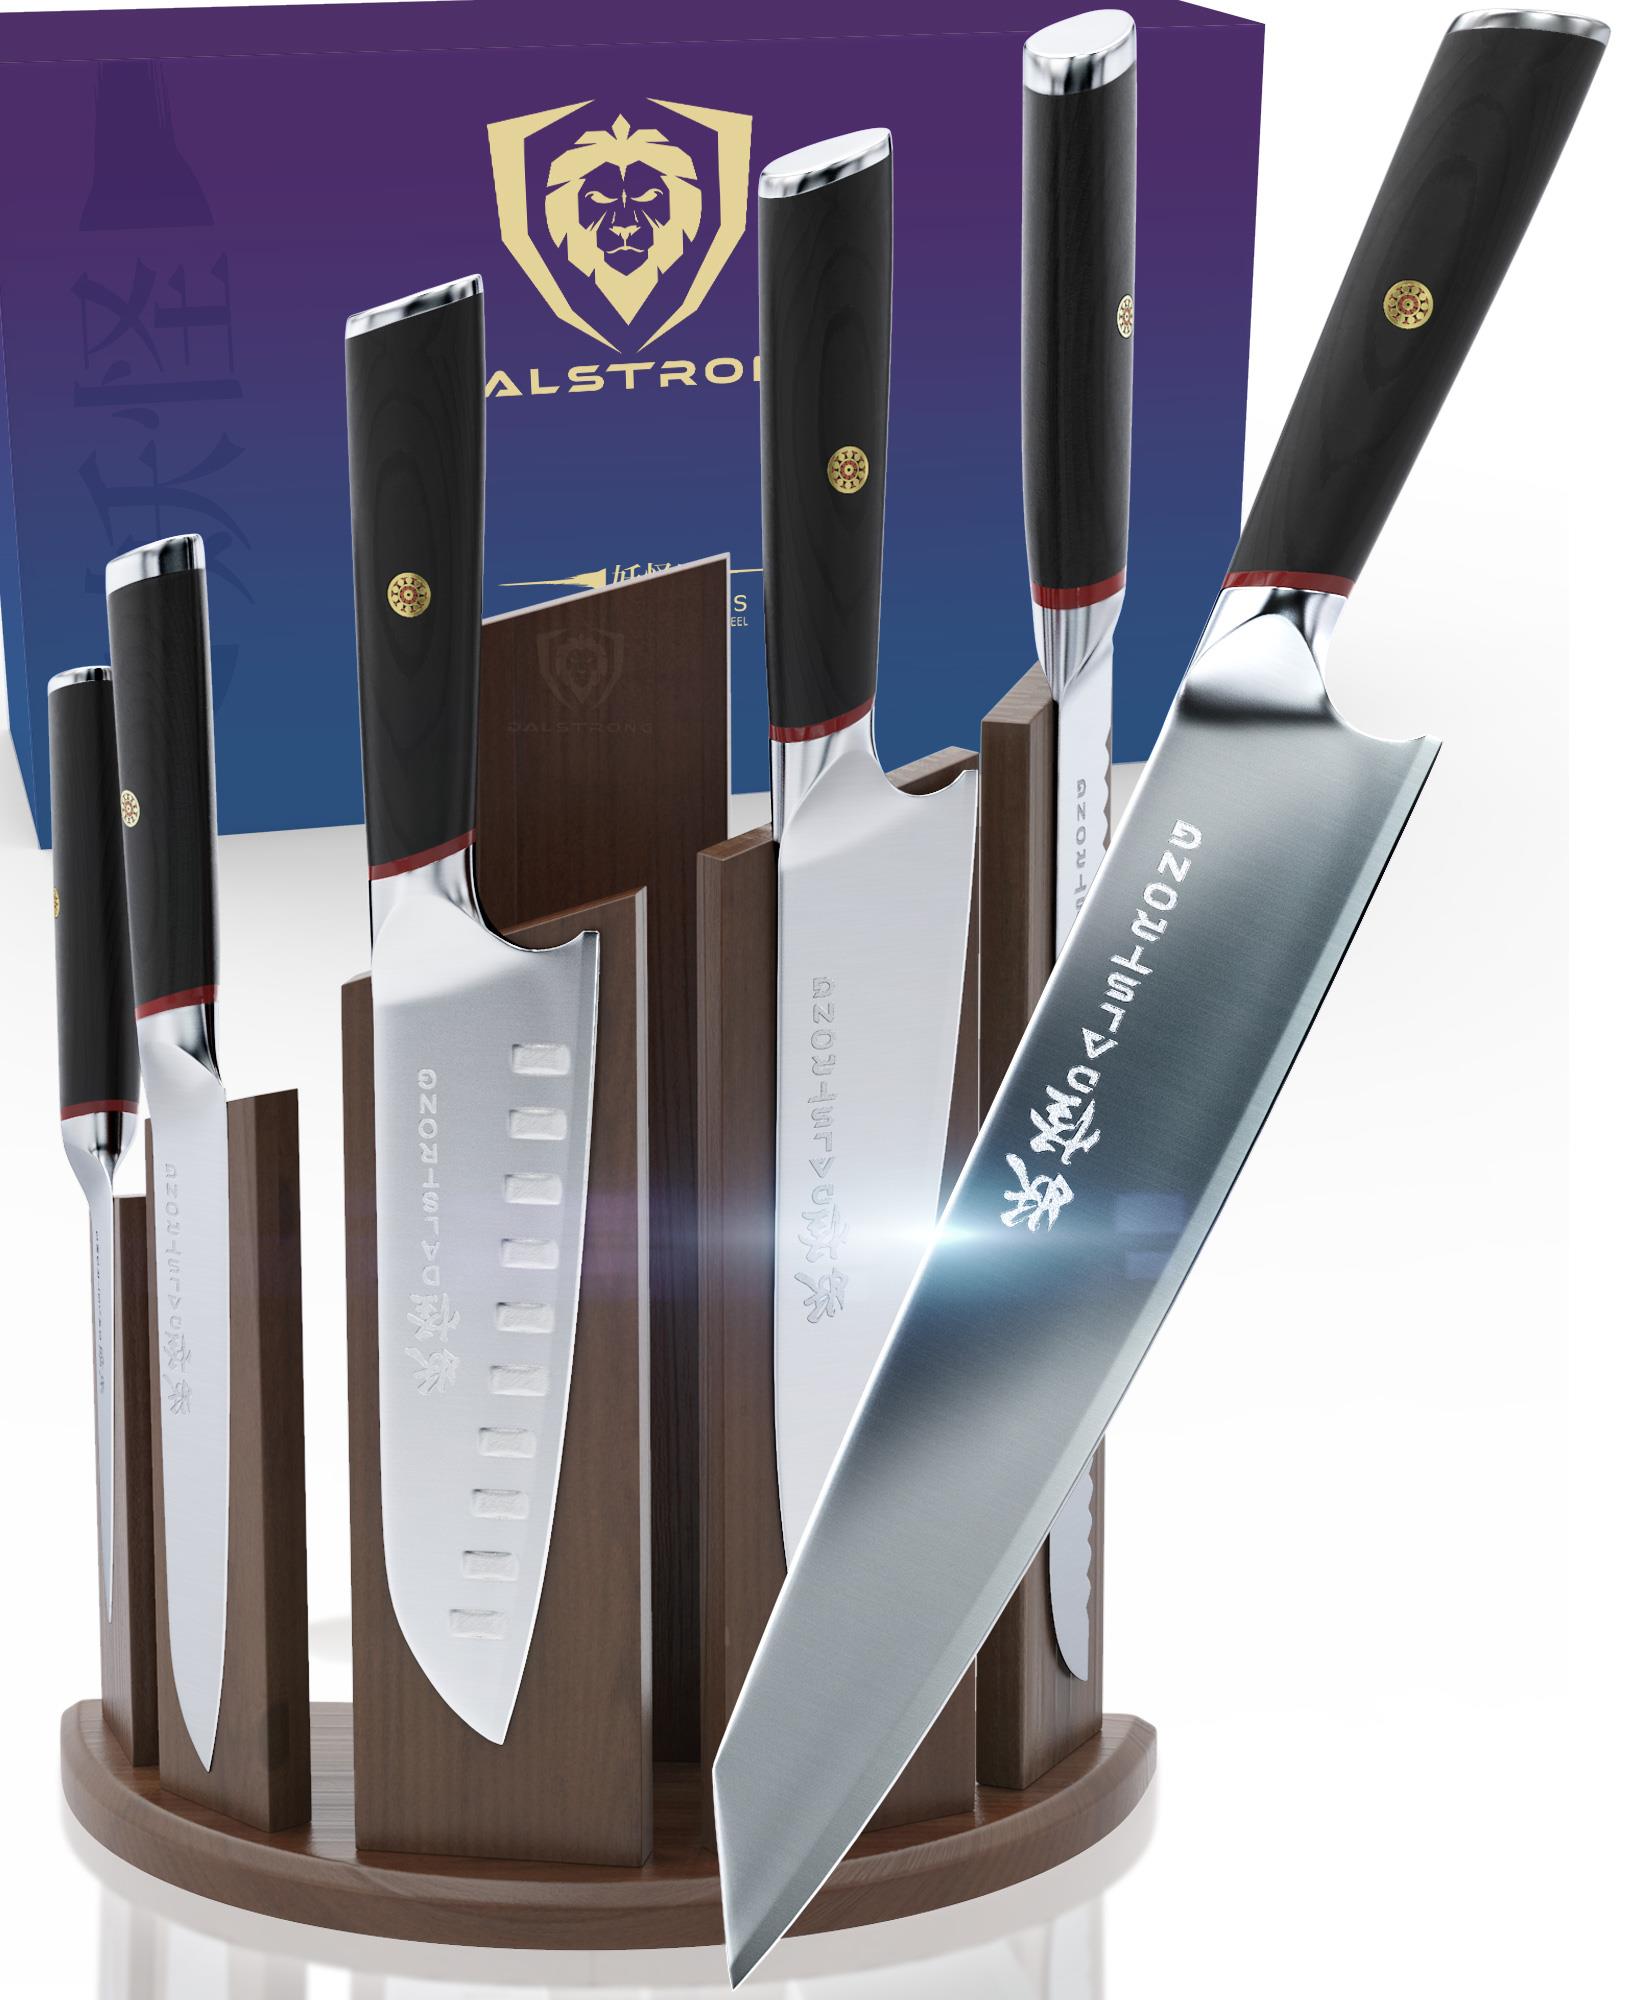 Dalstrong 5-Piece Knife Block Set - Shadow Black Series